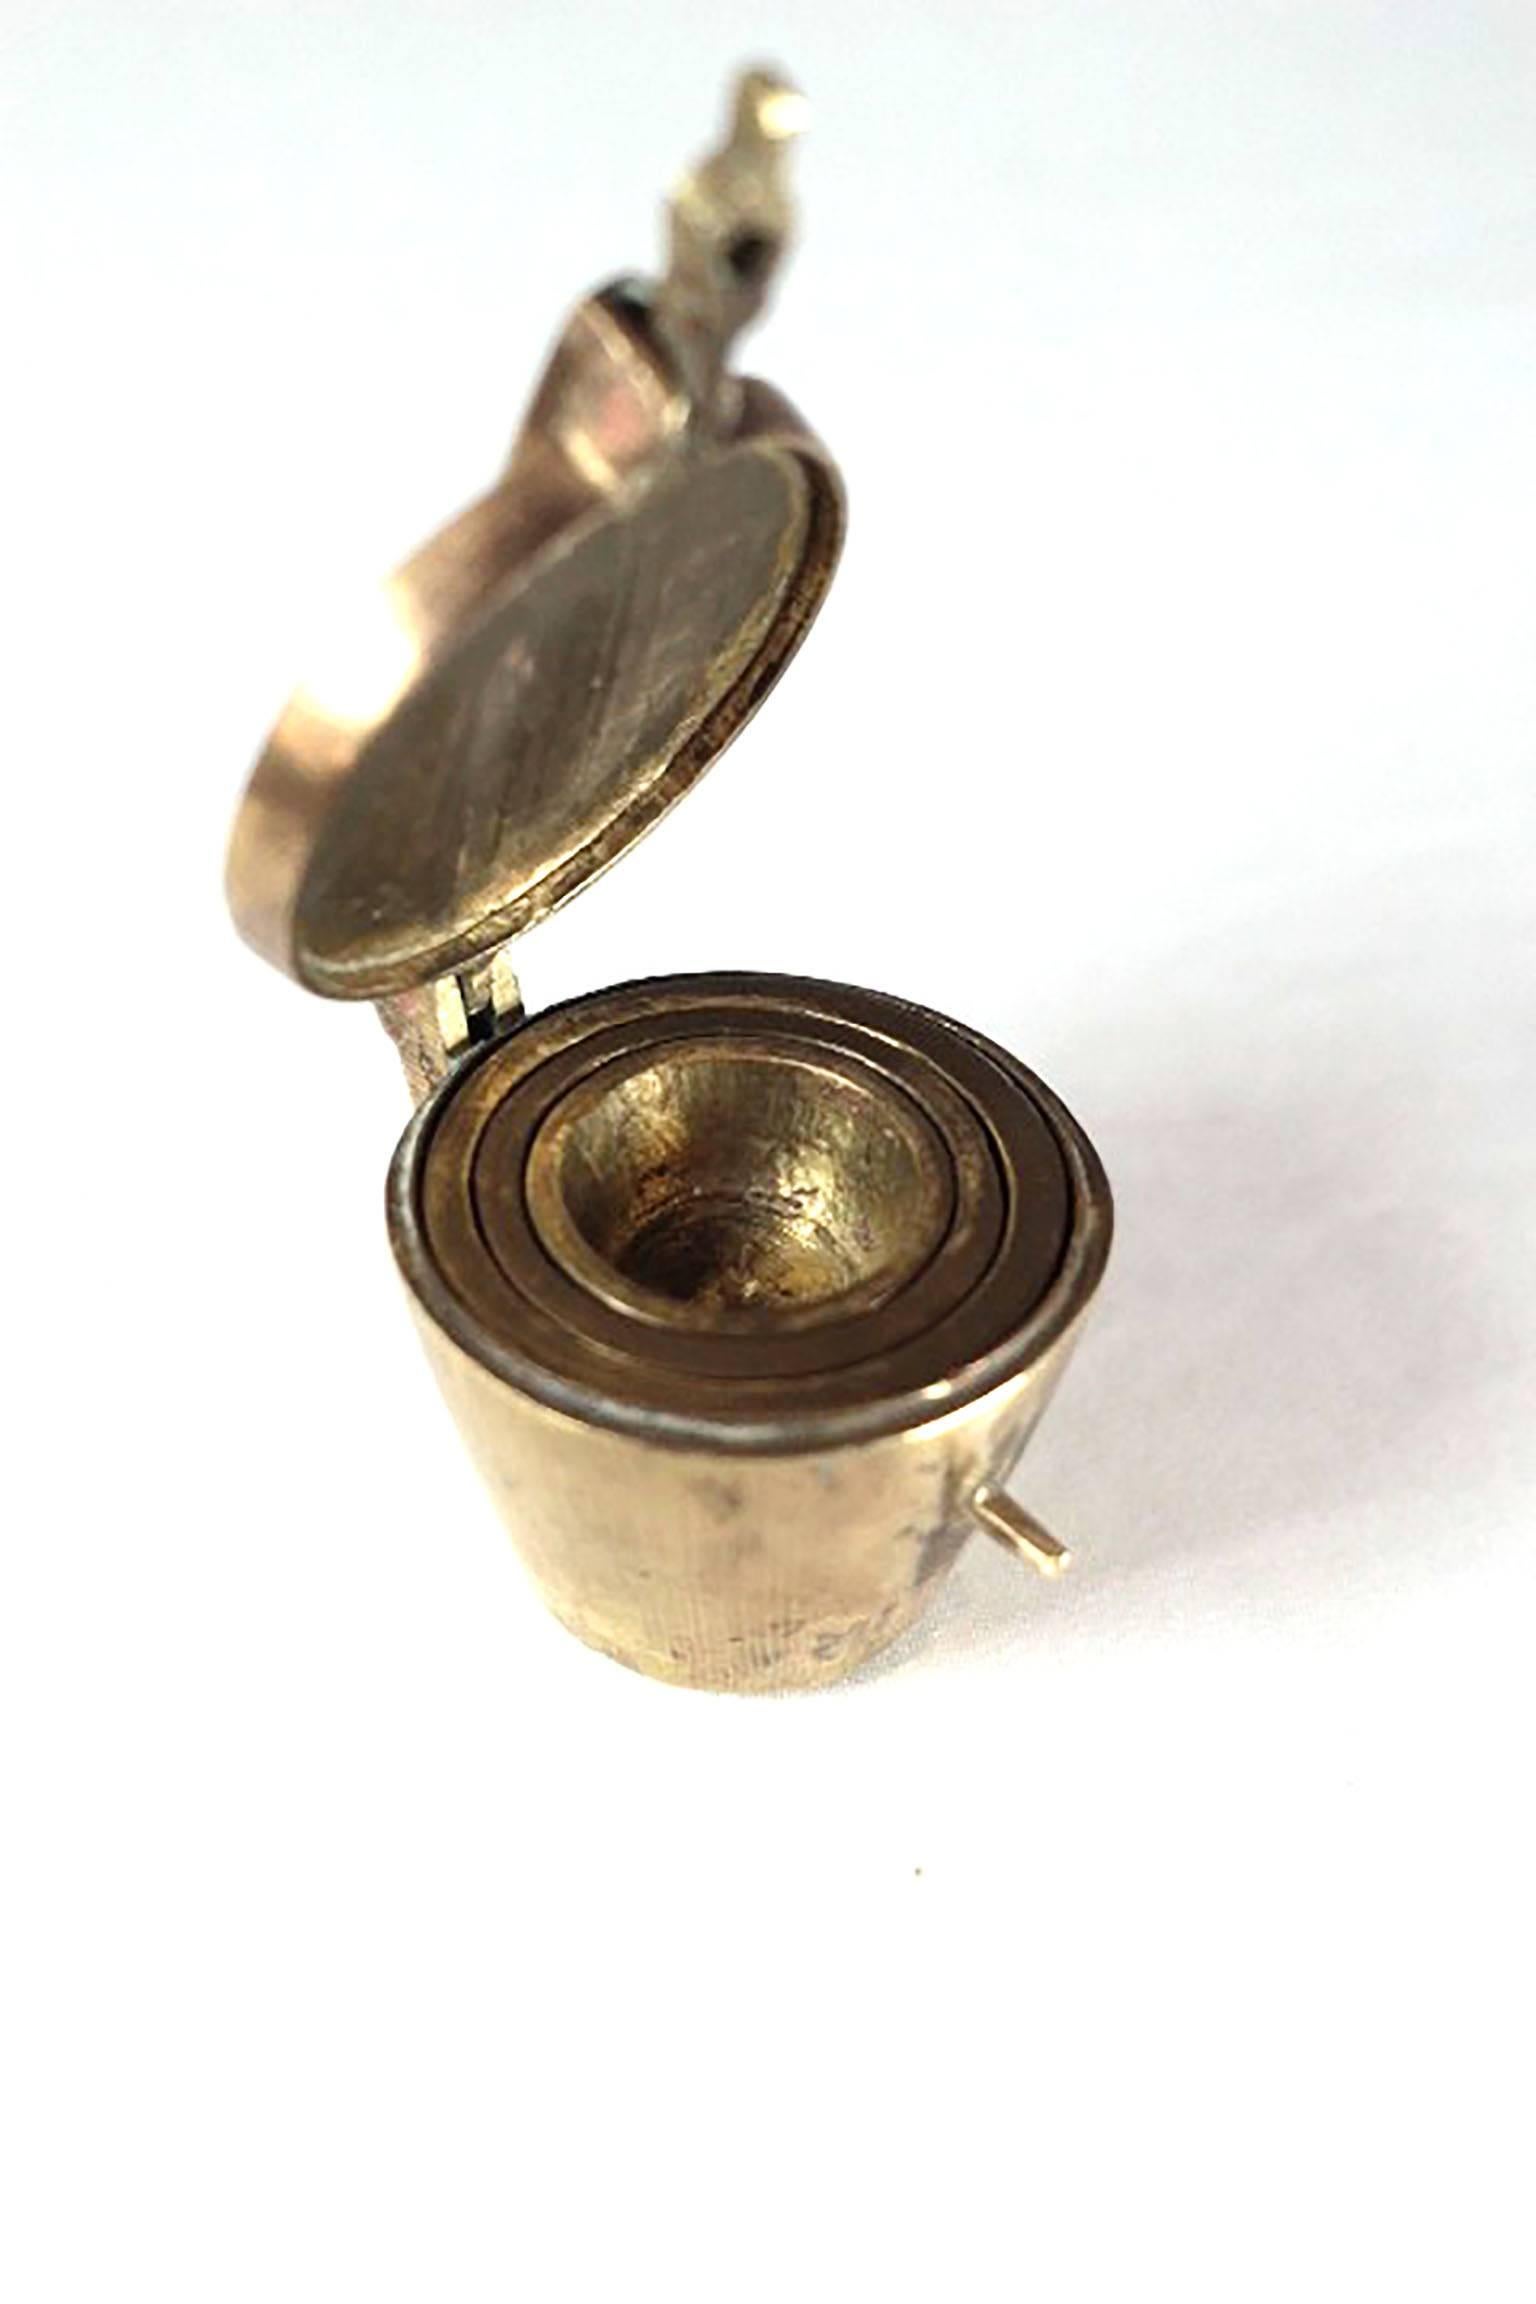 A nineteenth century apothecary's set of five cup nesting weights. (Smallest weight not pictured) The weights are contained in the largest weight which has a brass lid.

It appears that the total weight of all 5 weights together is about 489 grams